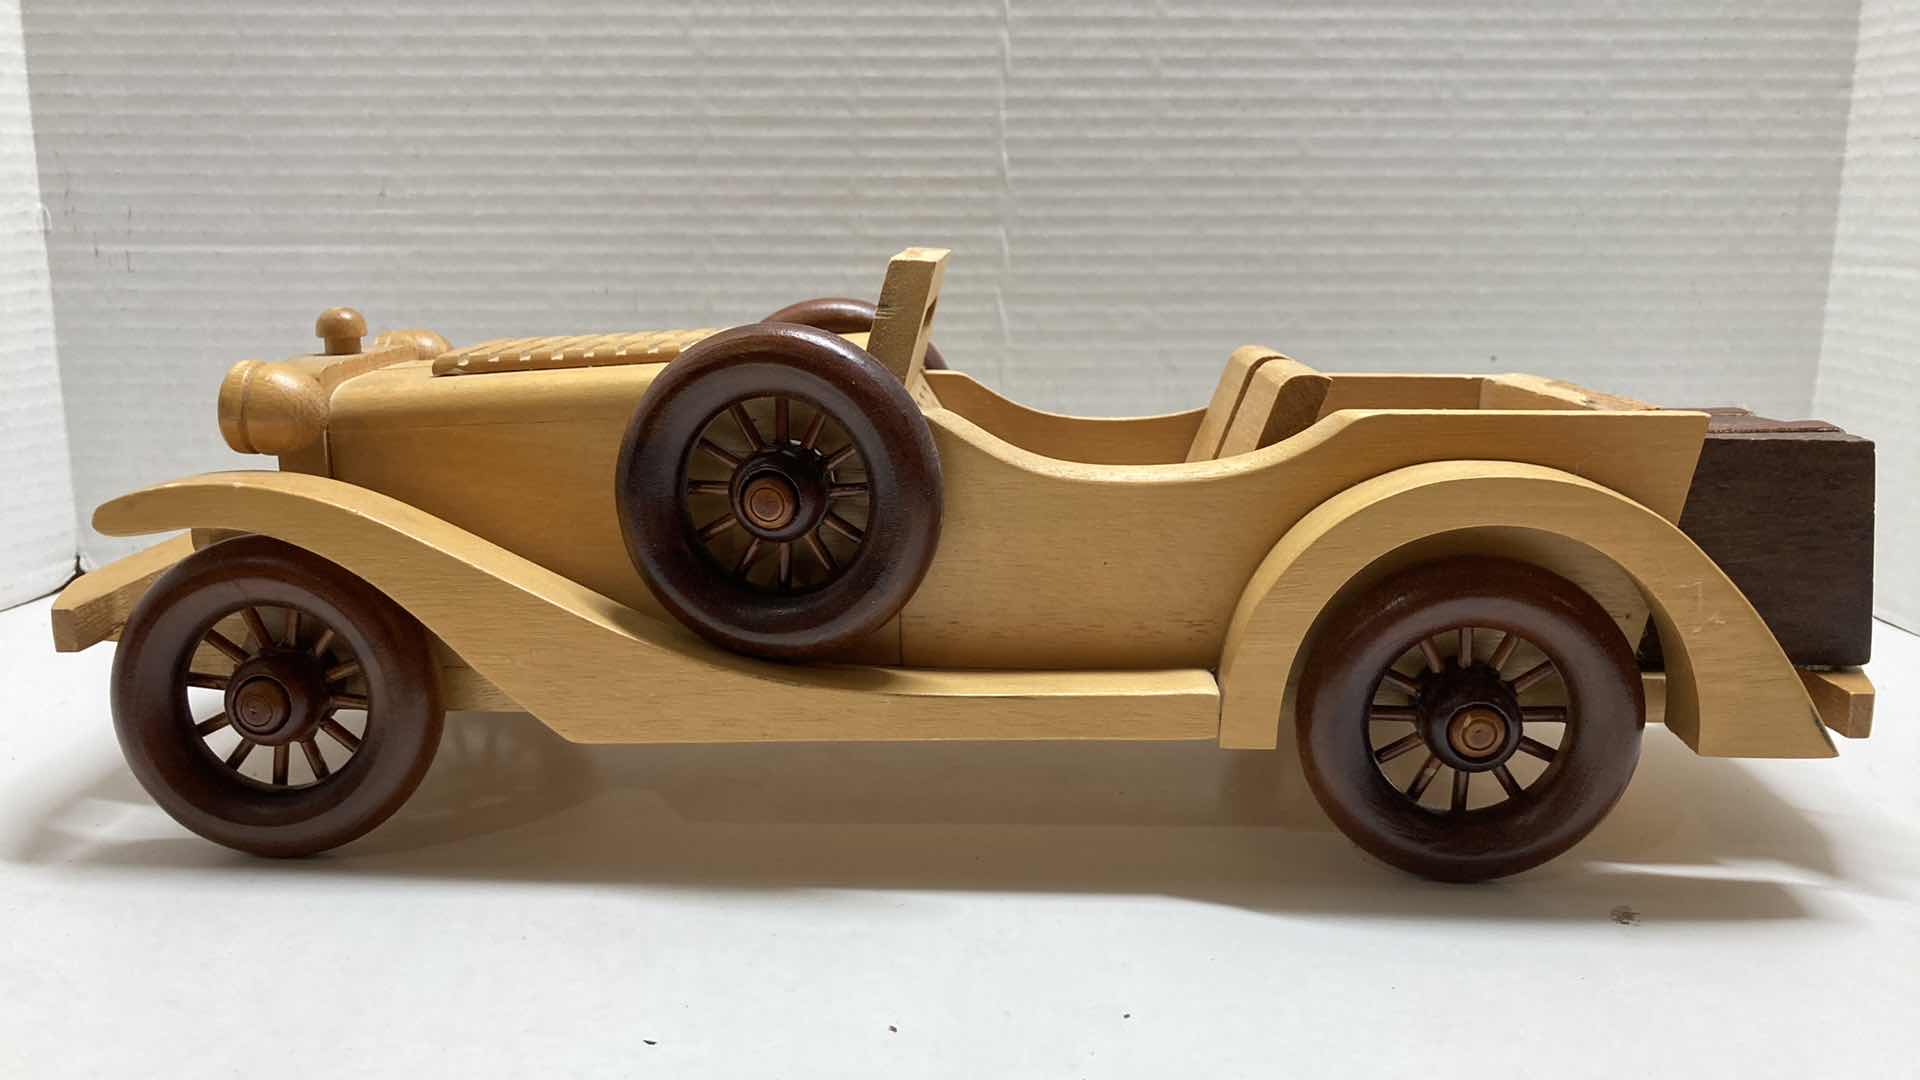 Photo 4 of EARLY-CENTURY STYLE WOOD AUTOMOBILE DECOR 15” X 5” H5”